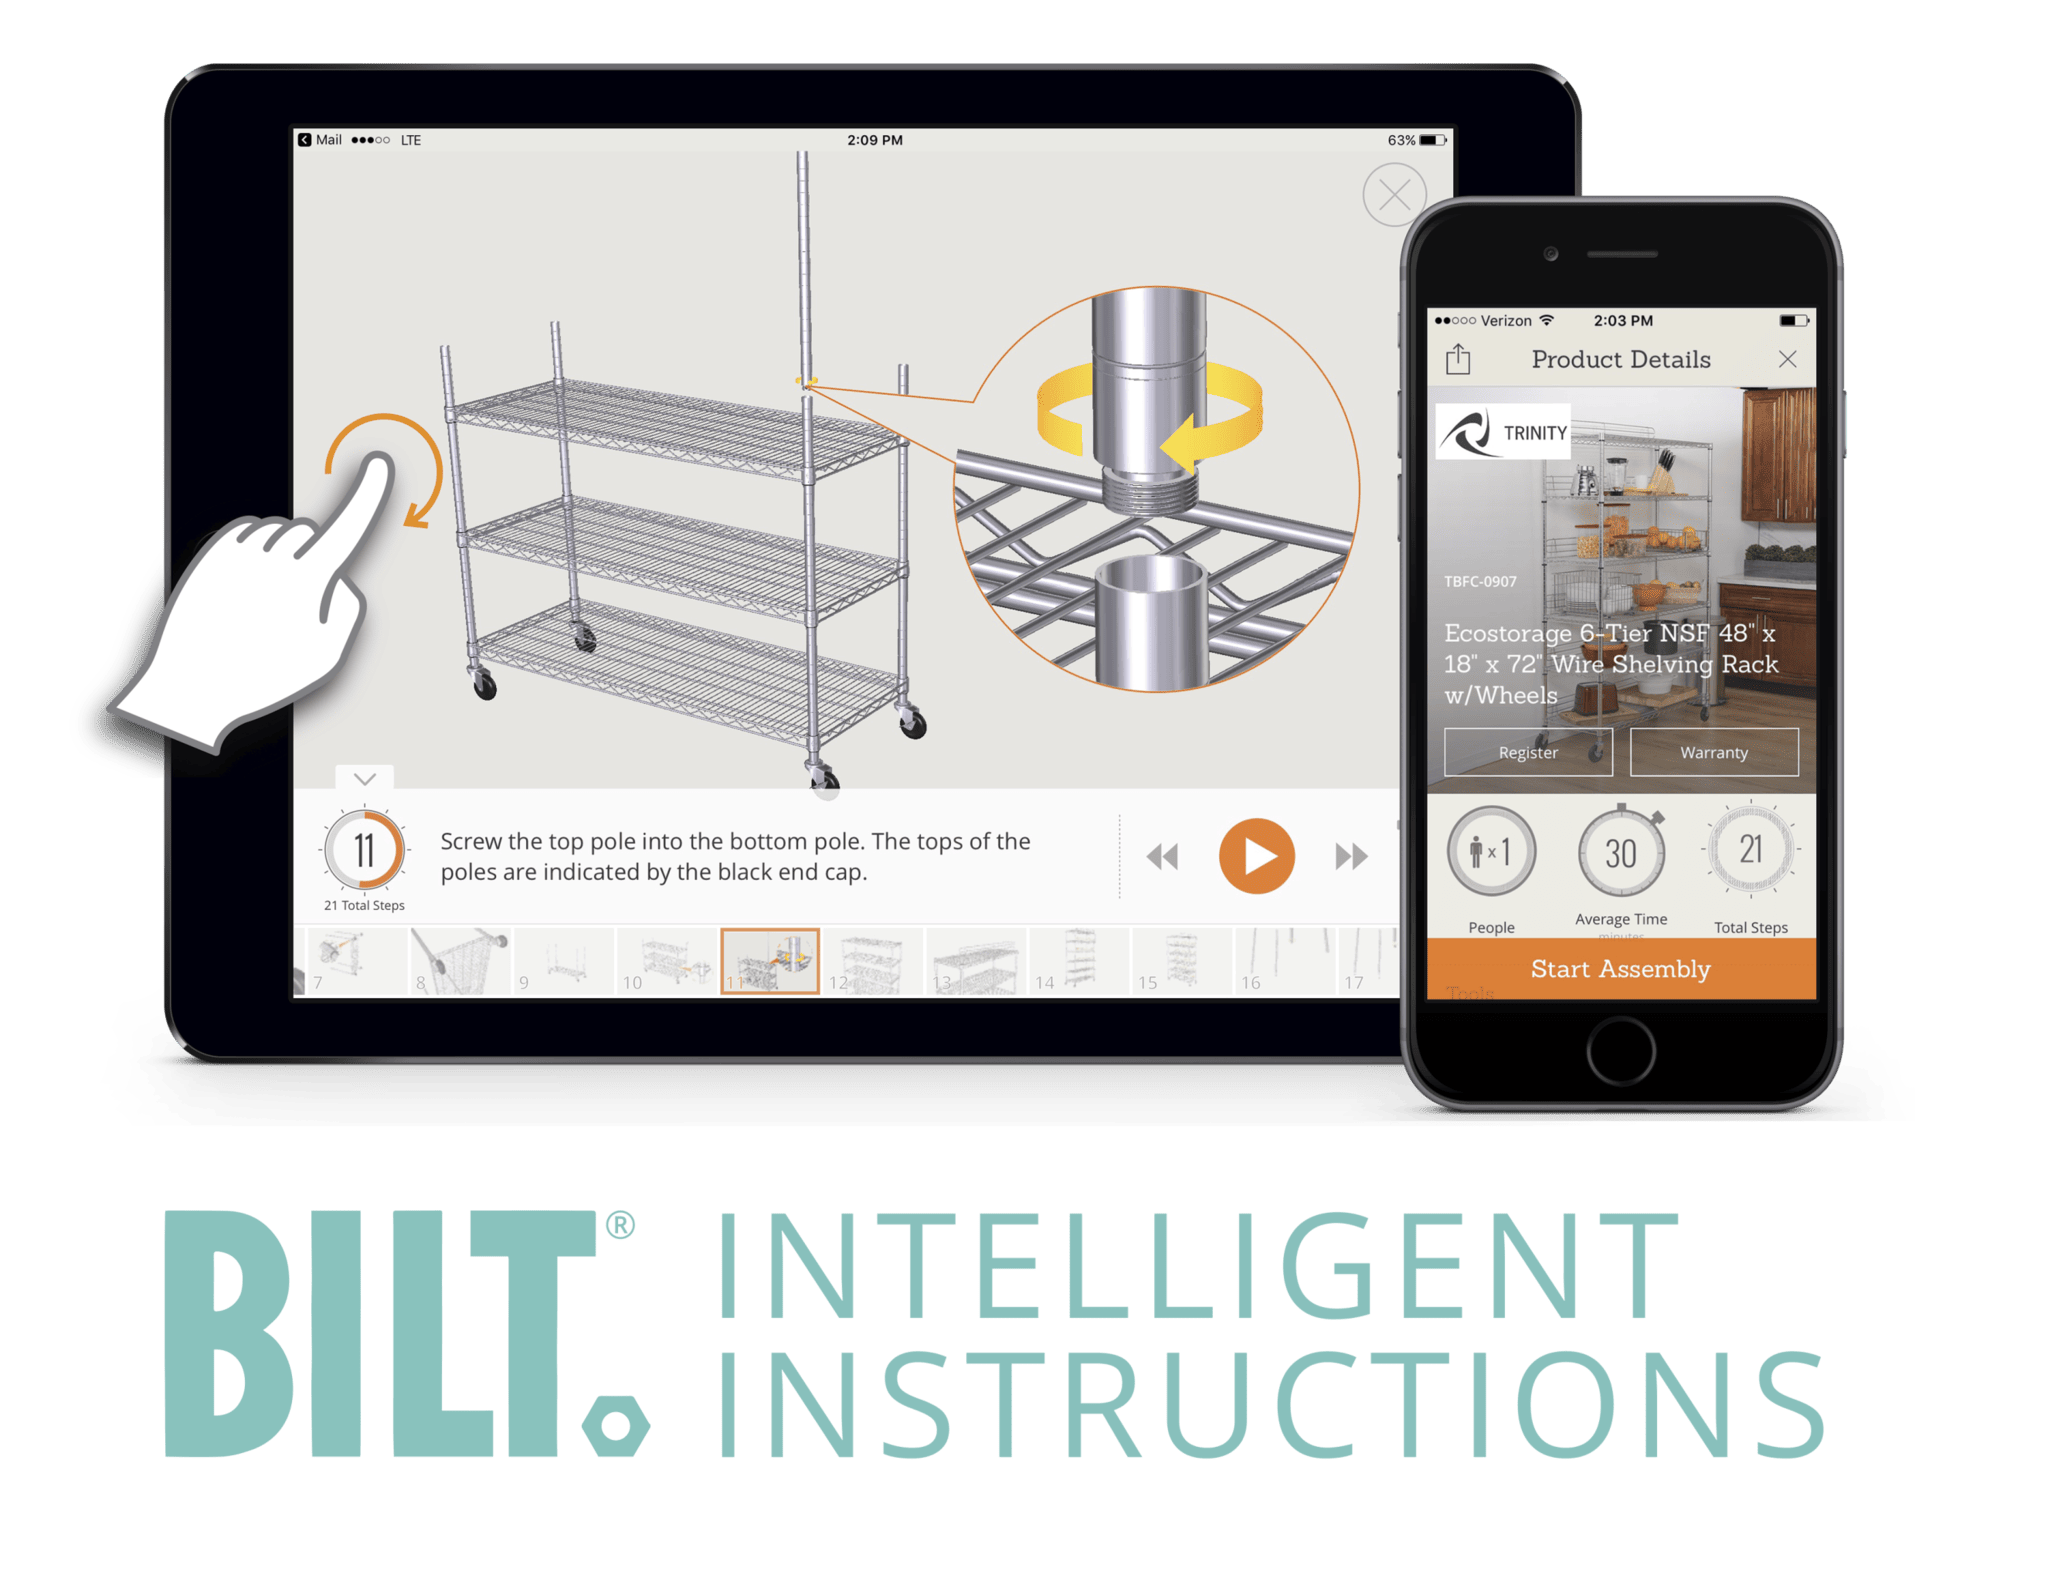 BILT interface shown on a tablet and mobile phone